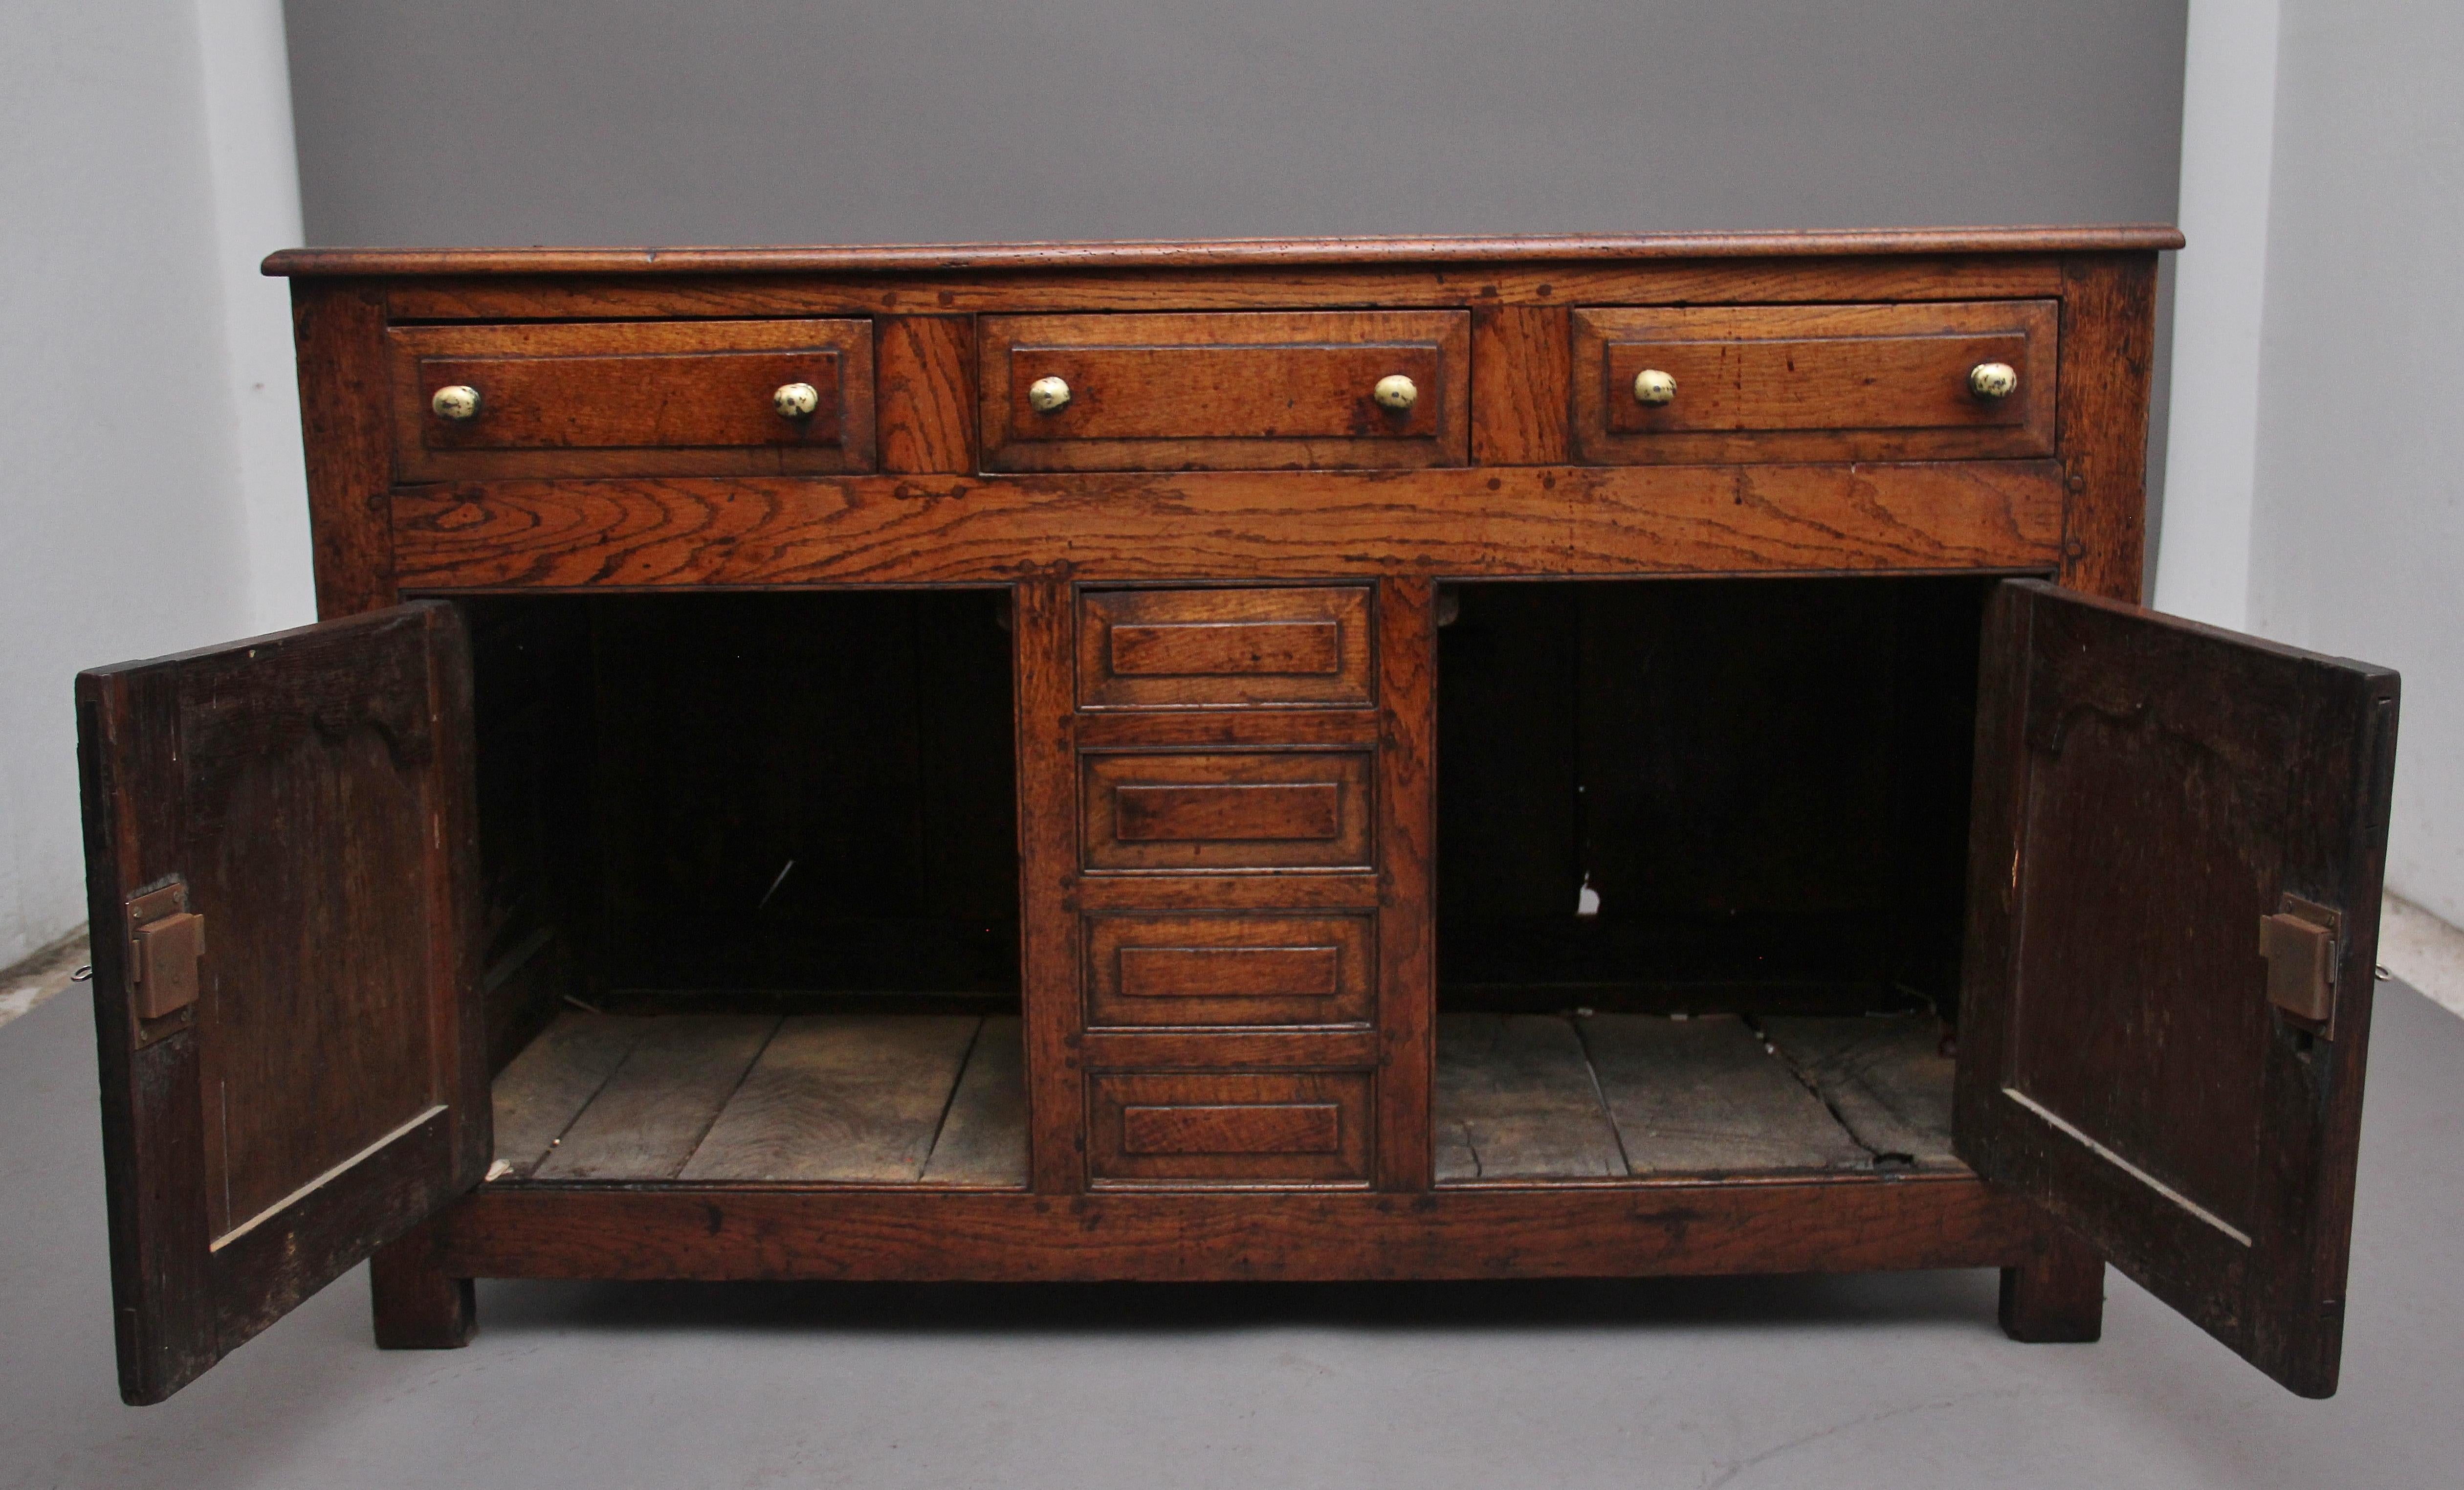 A superb quality 18th Century country oak dresser base, the moulded edge top above three drawers with turned brass knob handles, two cupboard doors below opening to reveal a large storage space, the cupboard doors having decorative fielded panels,